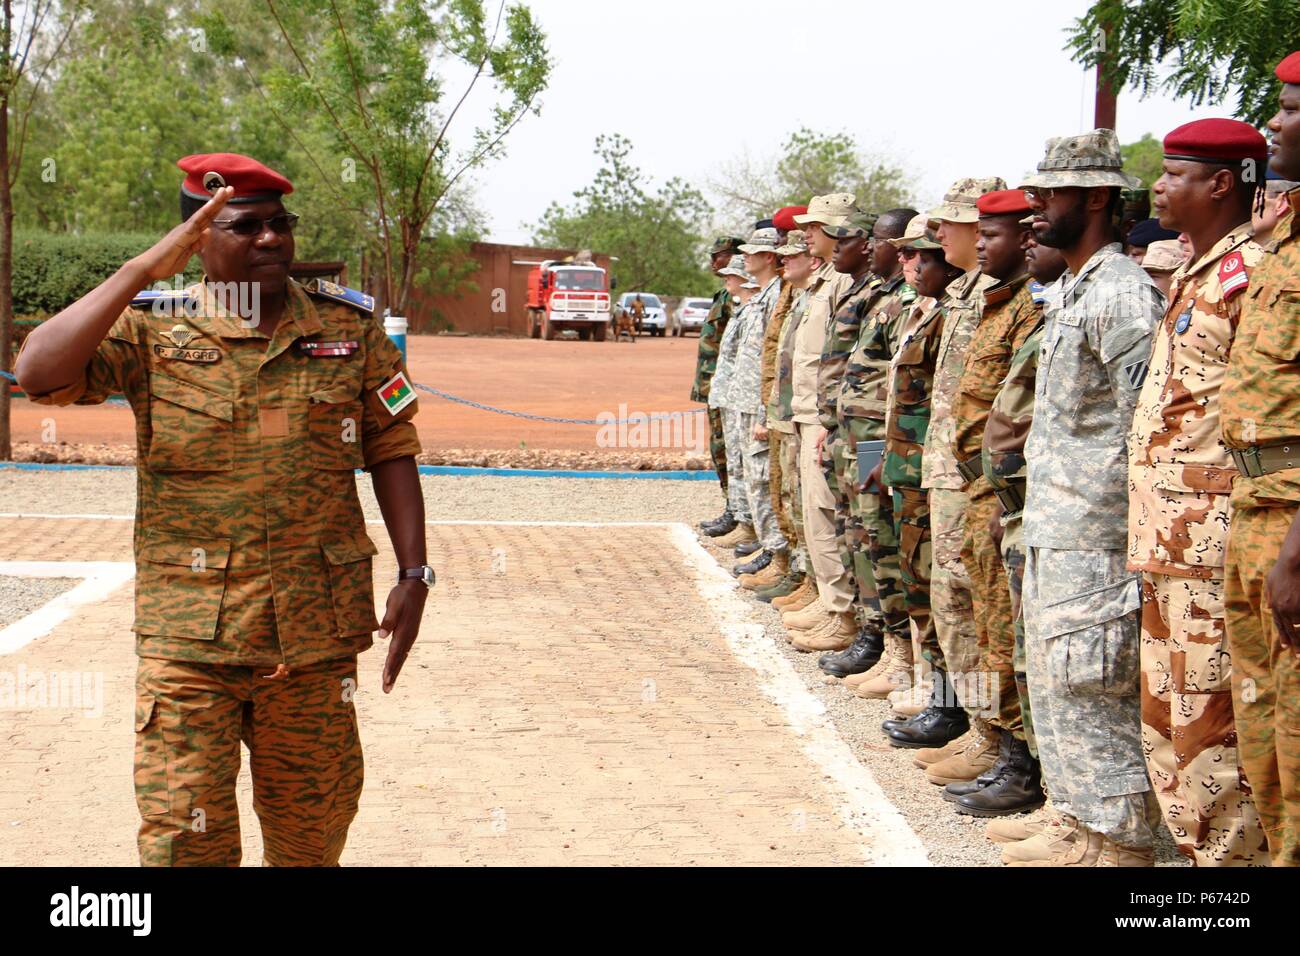 General Pingrenoma Zagre, Chief of Defense Staff for Burkina Faso Armed Forces, salutes multinational Western Accord 2016 participants during the exercise’s Closing Day Ceremony May 13, 2016 at Camp Zagre, Ouagadougou, Burkina Faso. The two-week command post exercise, which began May 2, brought together 15 West African Nations, 7 NATO European countries and the U.S. to work as a multinational headquarters to build interoperability and shared understanding. (U.S. Army photo by Staff Sgt. Candace Mundt/Released) Stock Photo